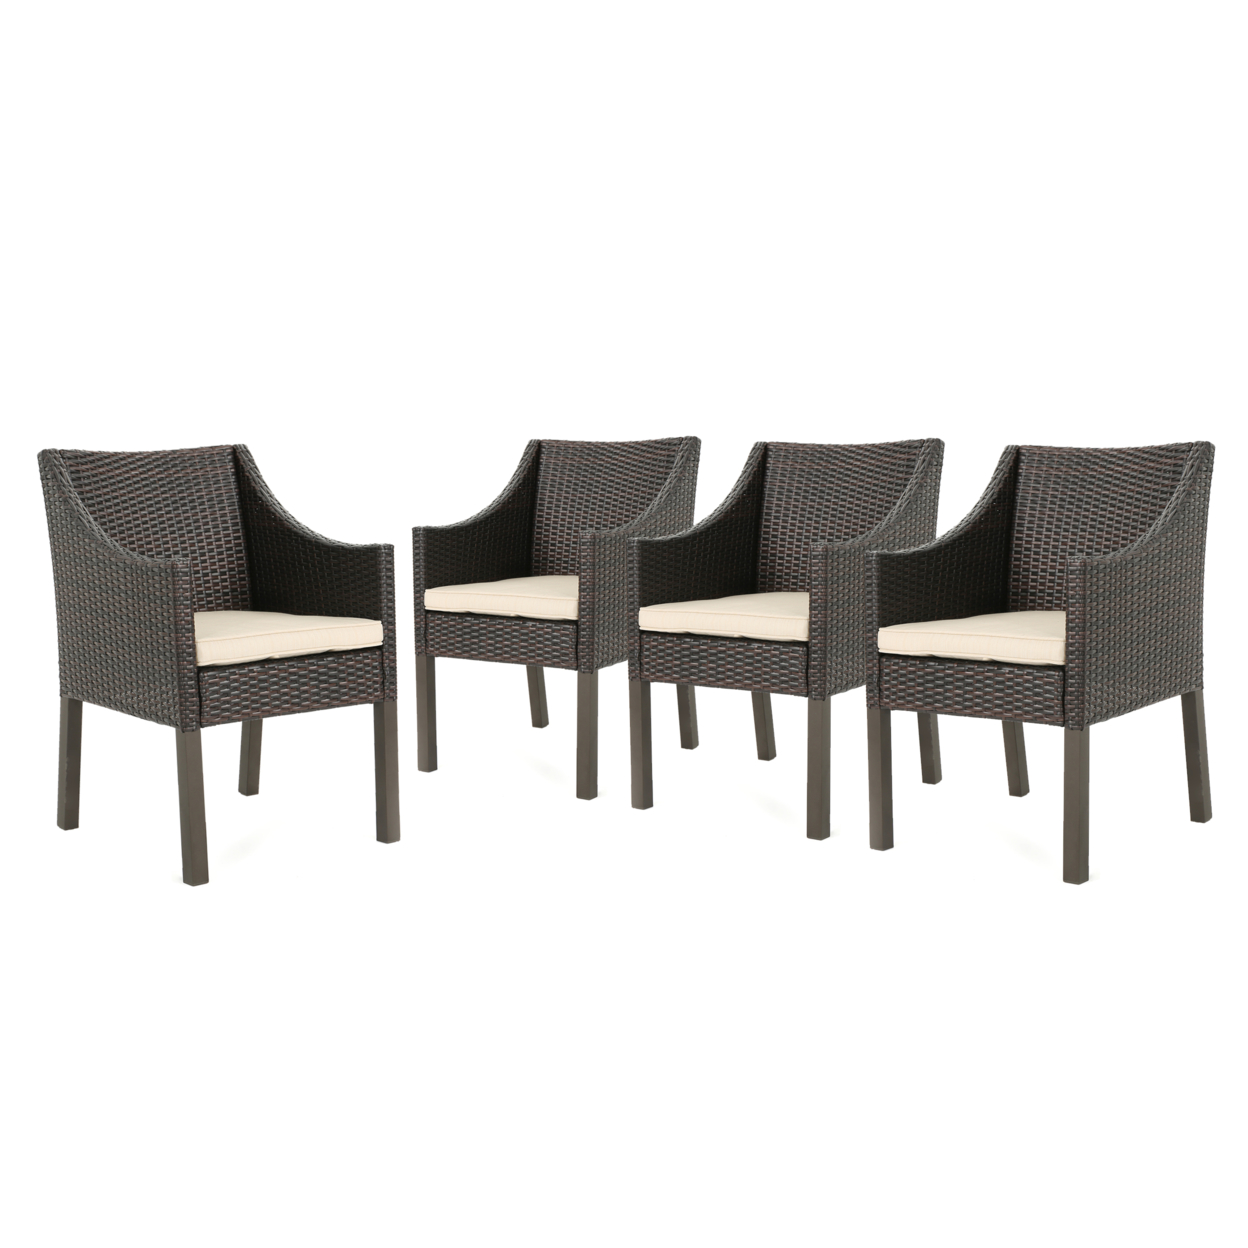 Athena Outdoor Wicker Dining Chairs With Water Resistant Cushions (Set Of 4) - Gray/Silver